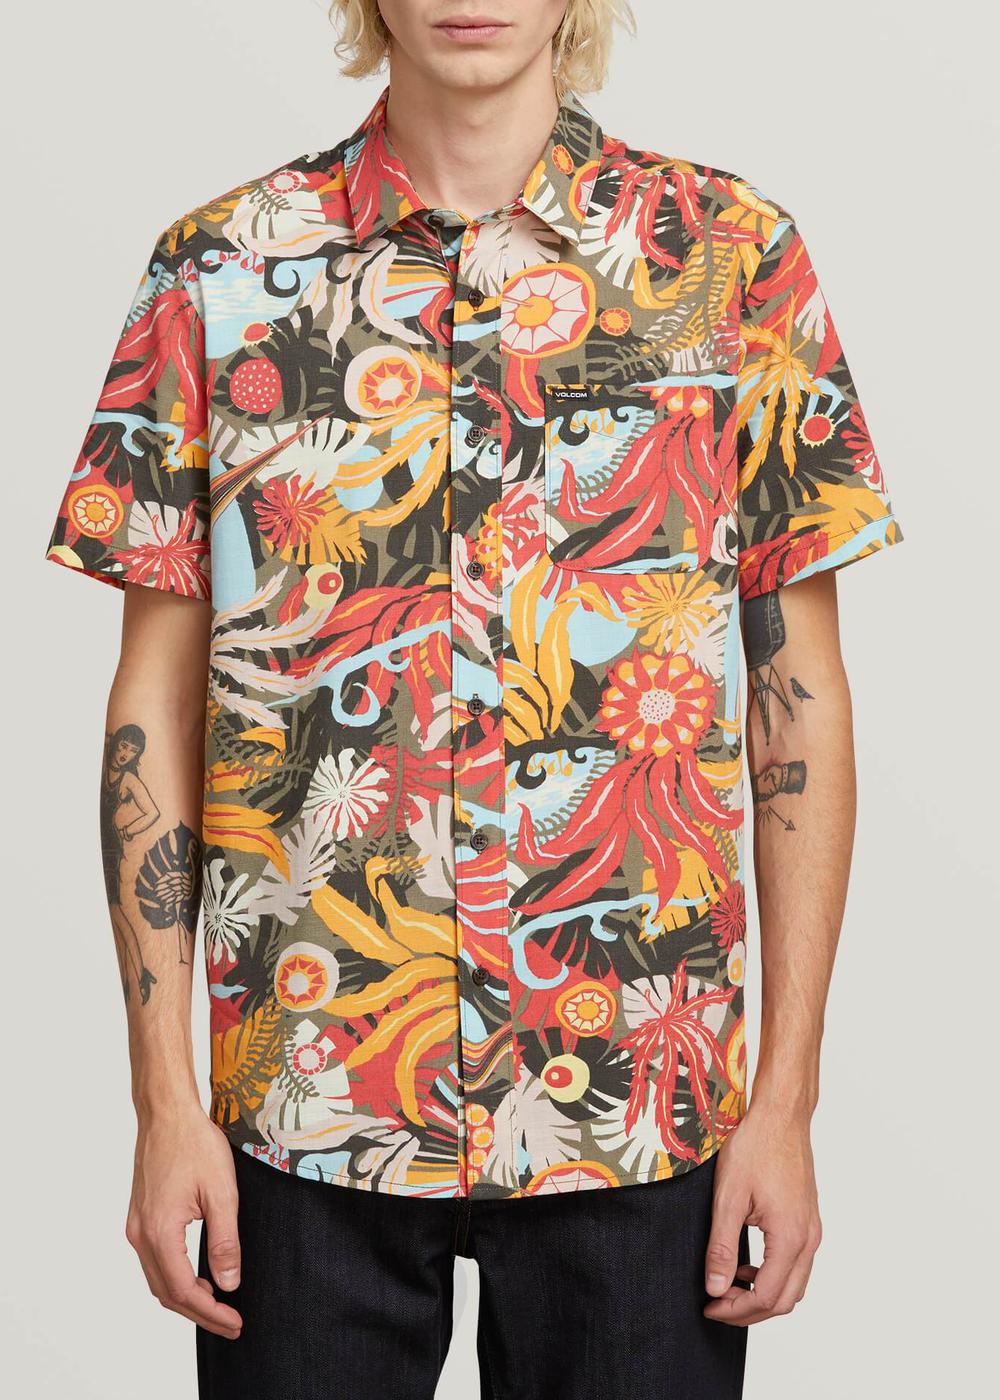 Volcom - Similar stores, new products, store review, Q&A | Modvisor